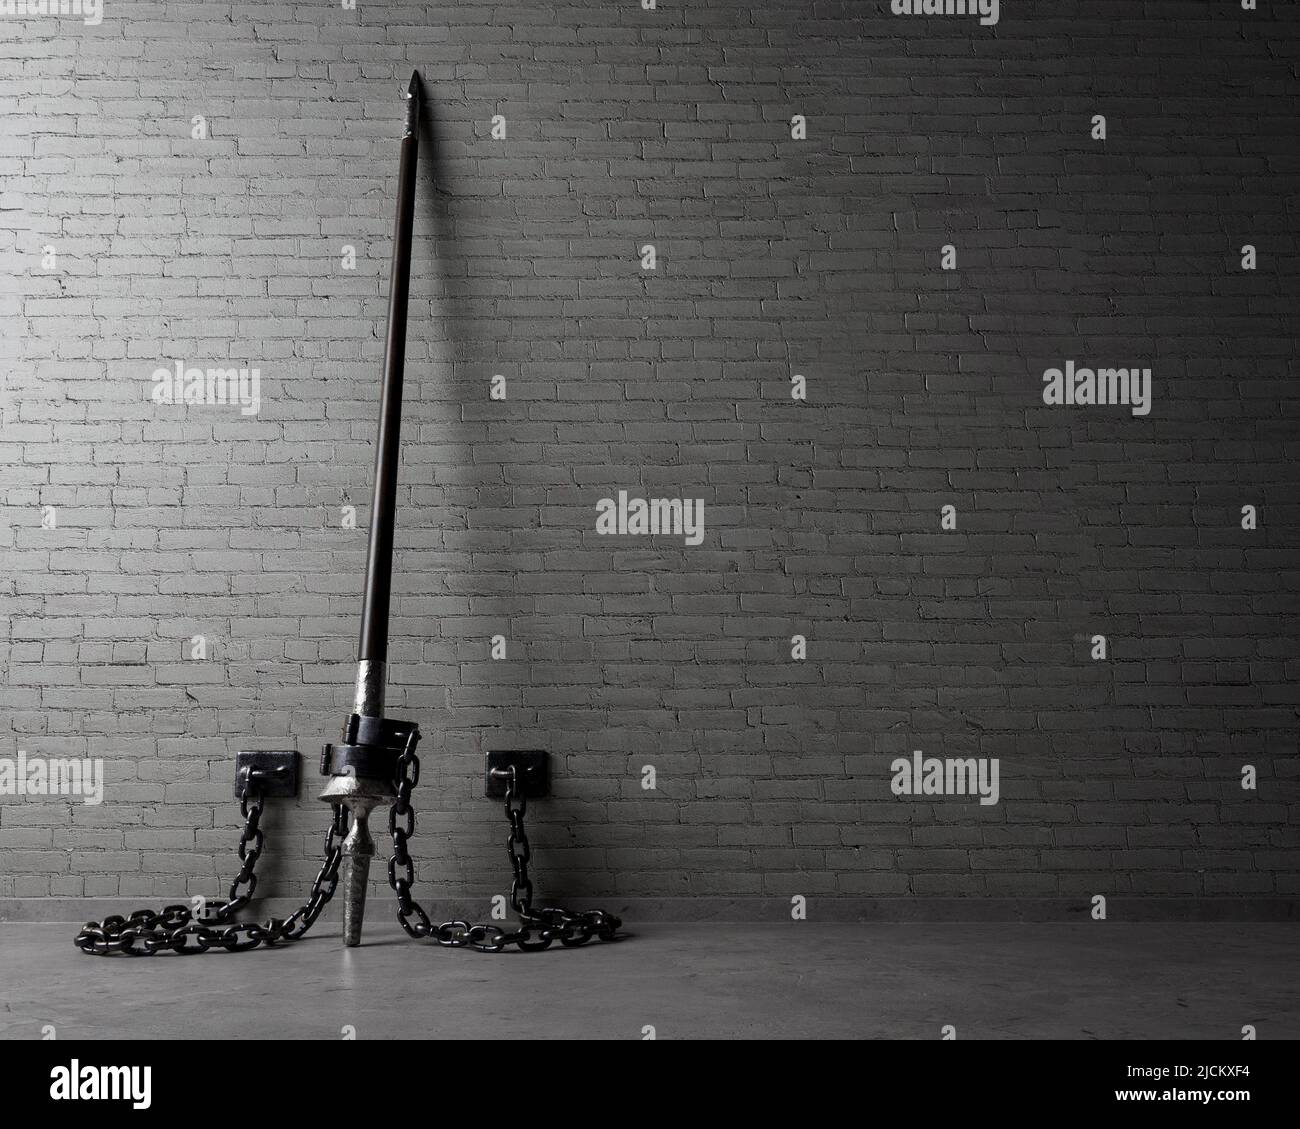 A play on words concept showing an upstanding medieval wooden lance shackled with iron shackles  to an isolated brick wall  - 3D render Stock Photo